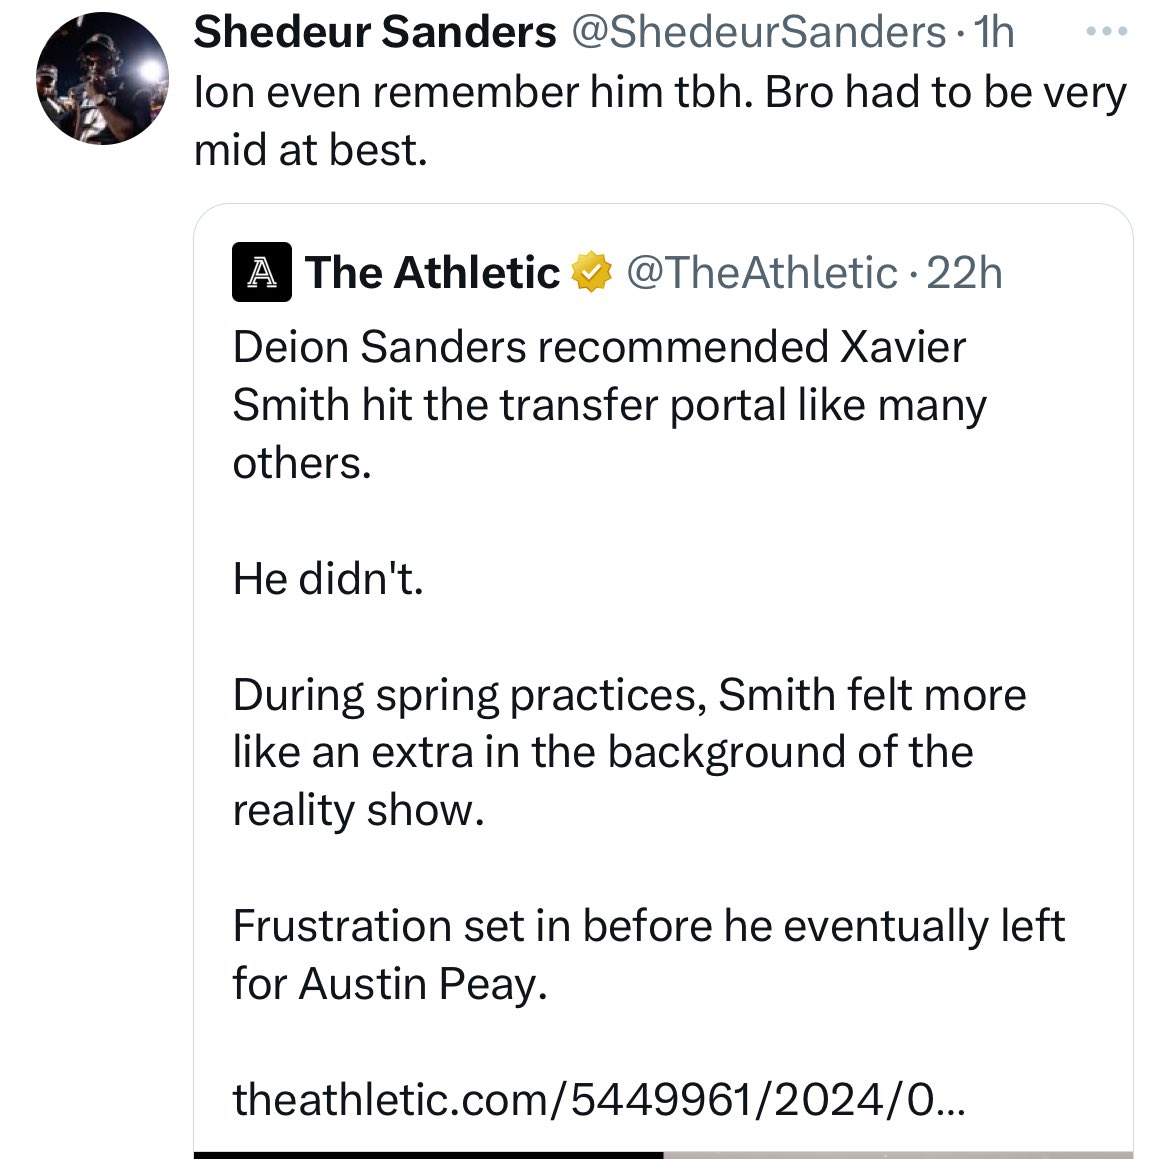 Colorado won 4 games last year and shedeur sanders talking like they were a 1 loss playoff team lmao this is why people don’t like Colorado and Deion sanders